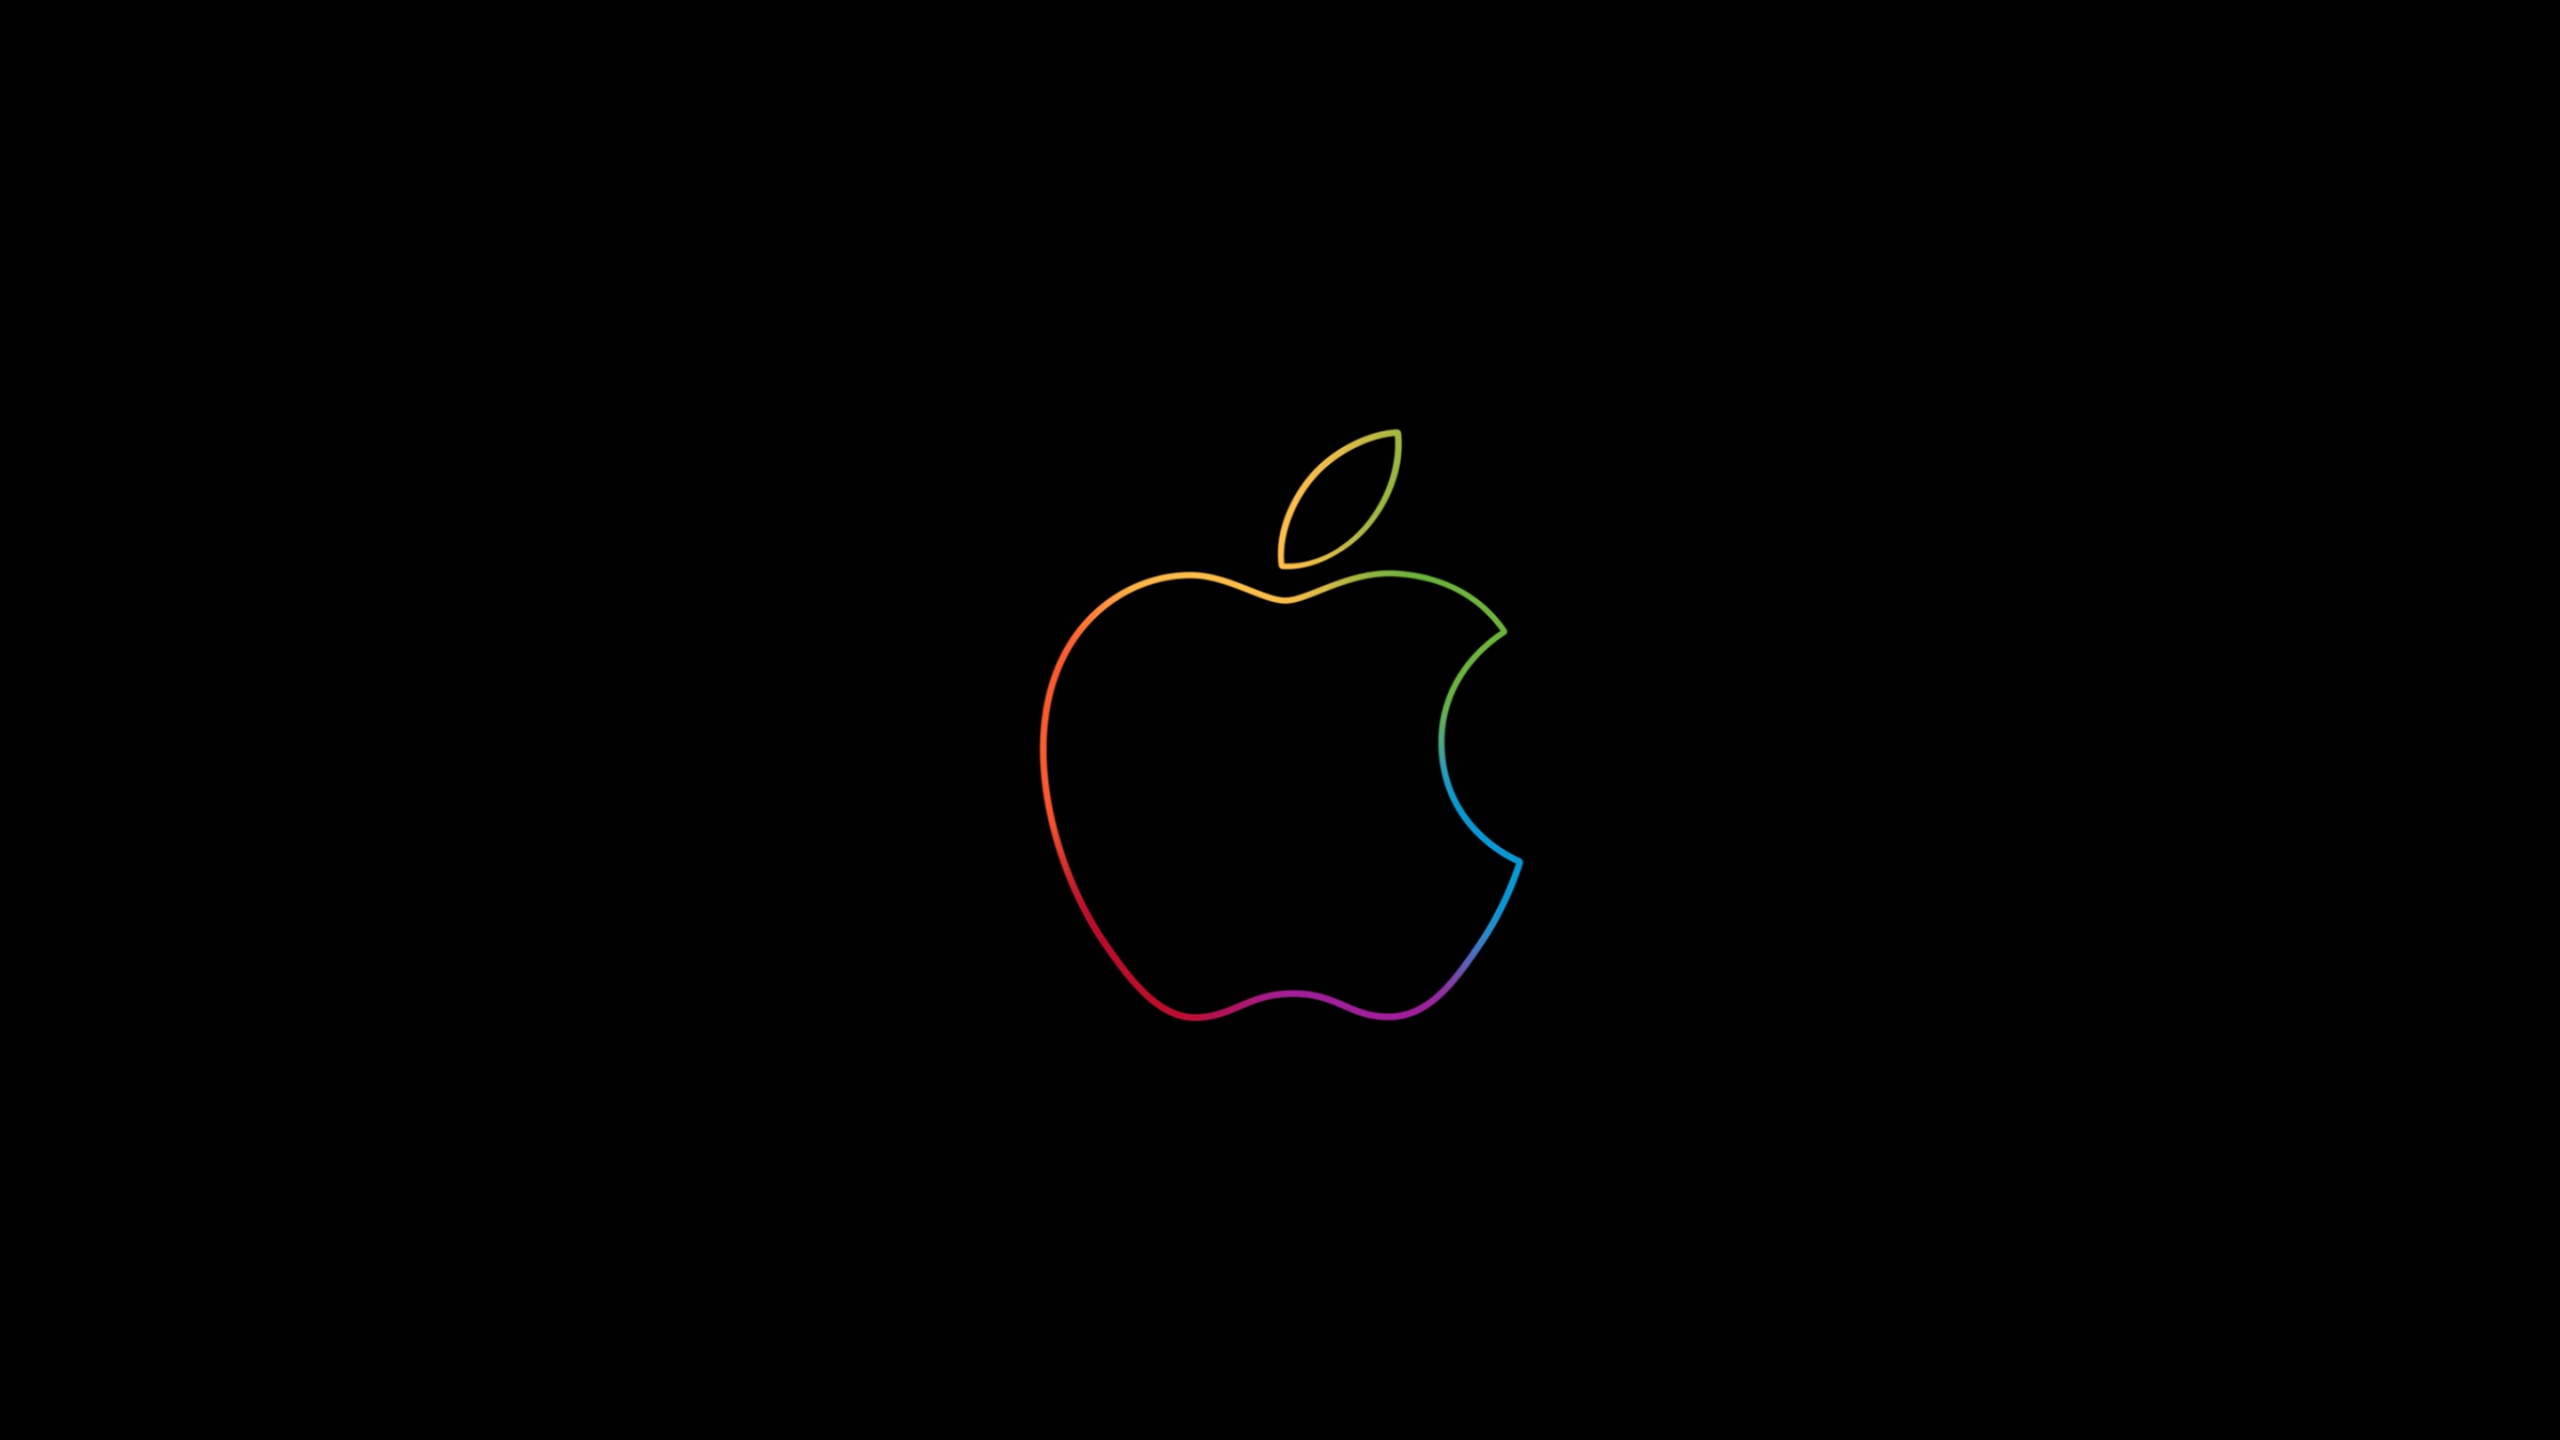 Apple Colorful Logo Wallpapers | HD Wallpapers